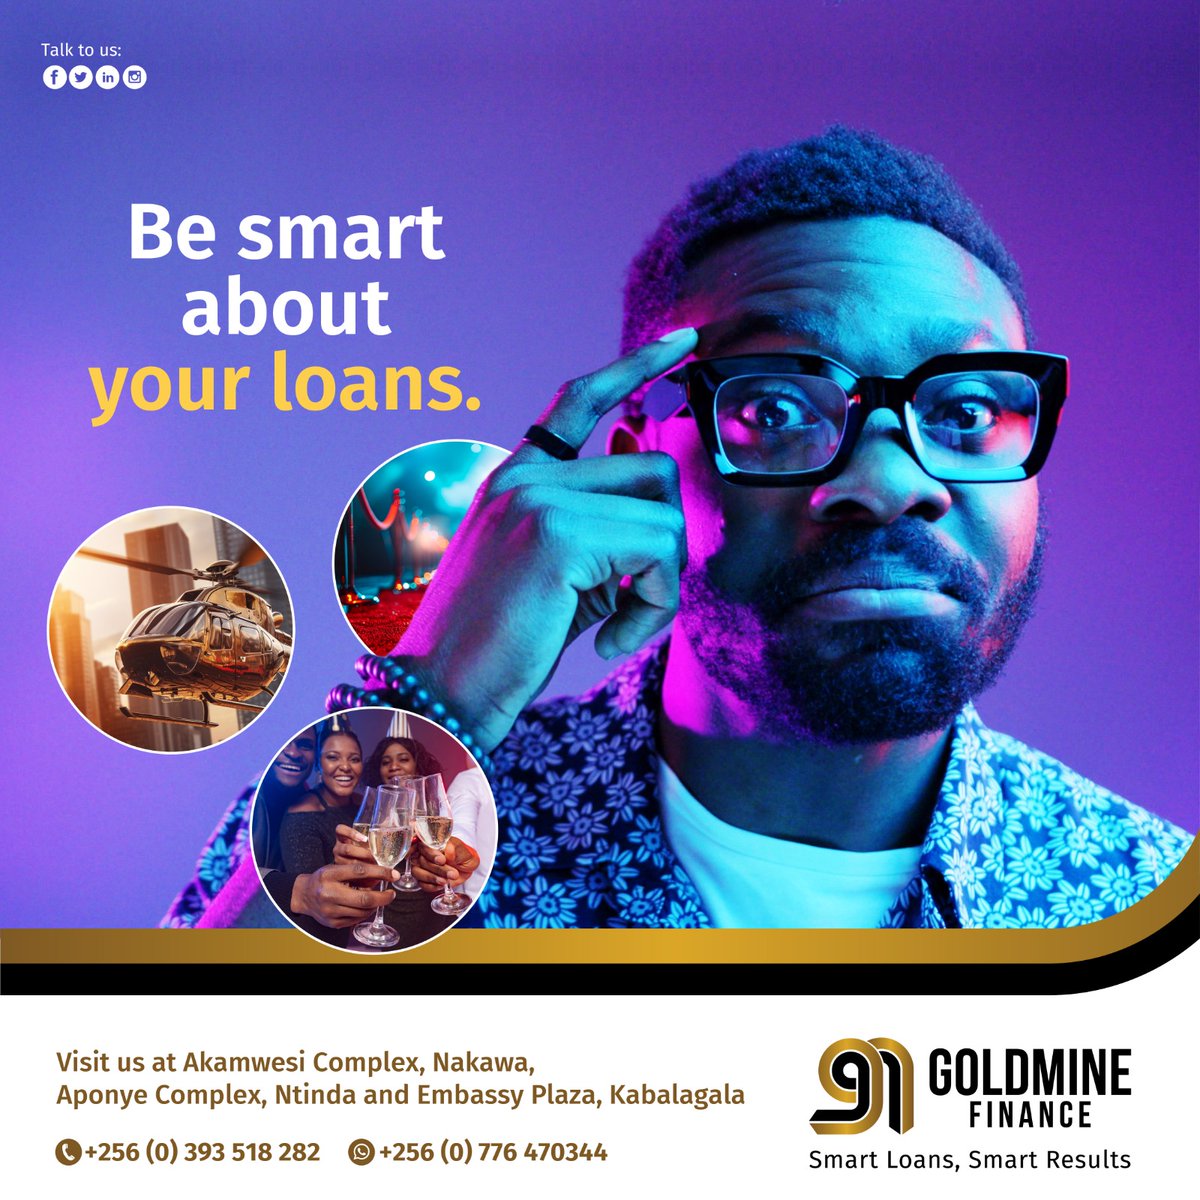 While others are getting #Helicopter Loans, and #Prom Loans, we encourage #SmartLoans for #SmartResults. Choose #GoldmineFinance. Visit any of our three branches today. Kabalagala, Ntinda and Nakawa #PersonalLoans #BusinessLoans #GoldmineFinance #SmartLoansSmartResults